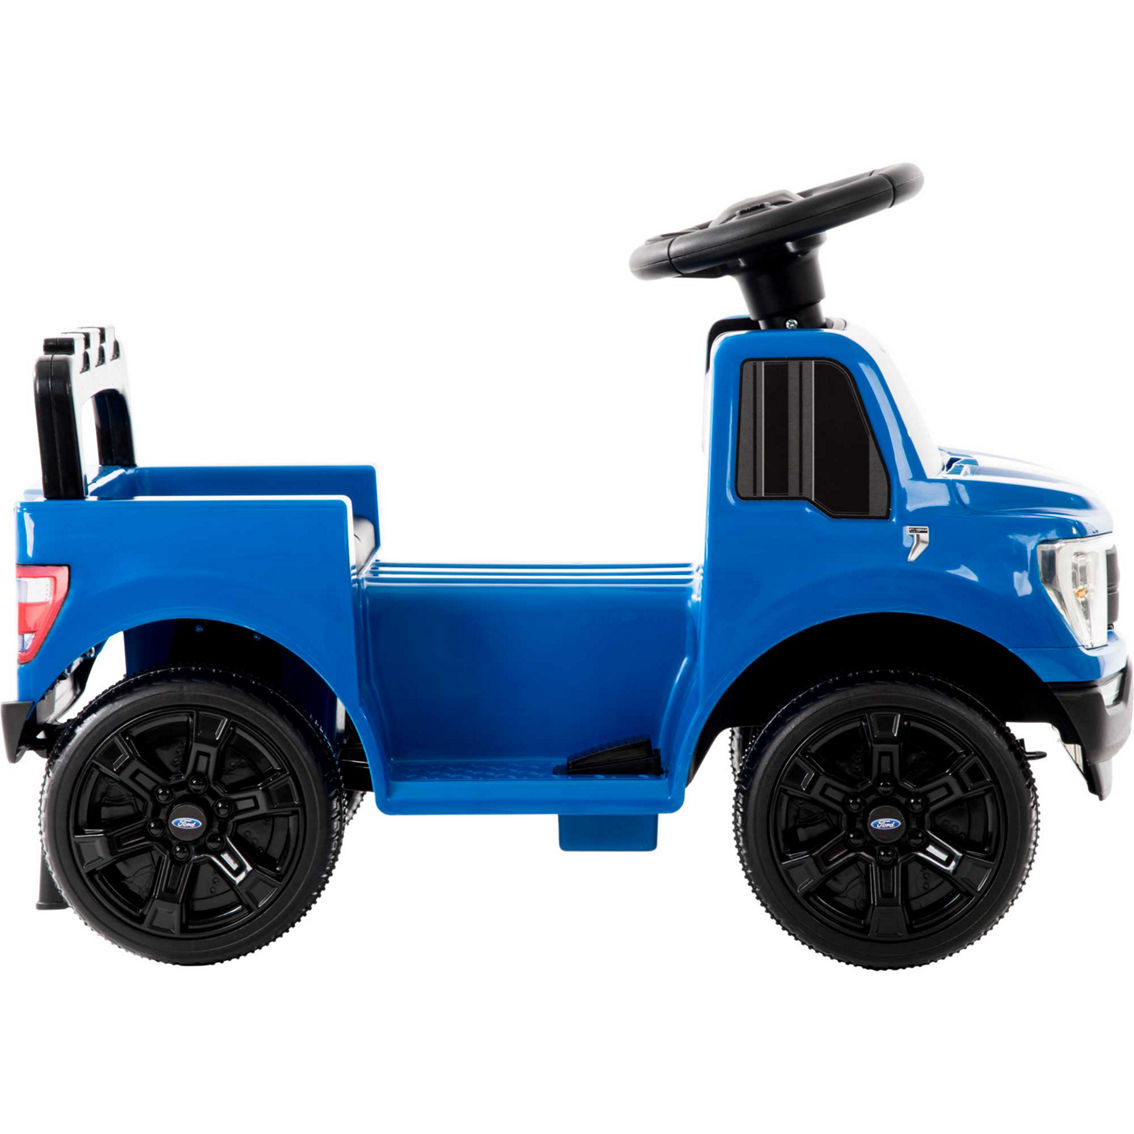 Huffy 6V Ford F150 Truck Battery Ride On Toy - Image 3 of 9